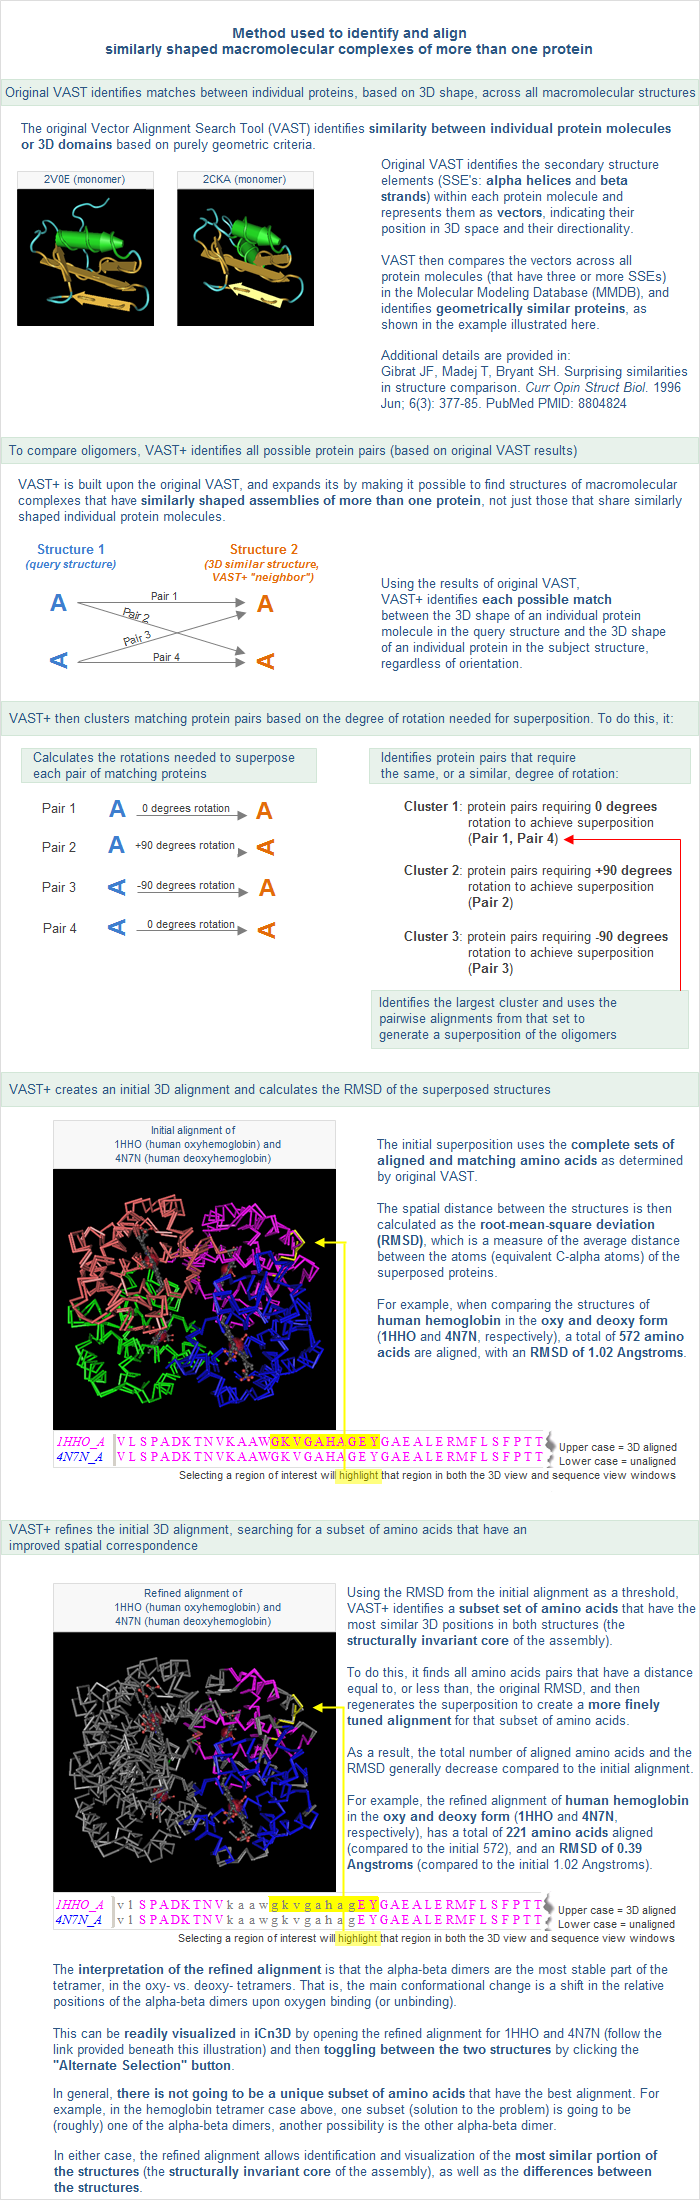 Illustration of the VAST+ algorithm; overview of the method used to identify similarly shaped macromolecular complexes, and to generate initial and refined 3D alignments of superposed structures.